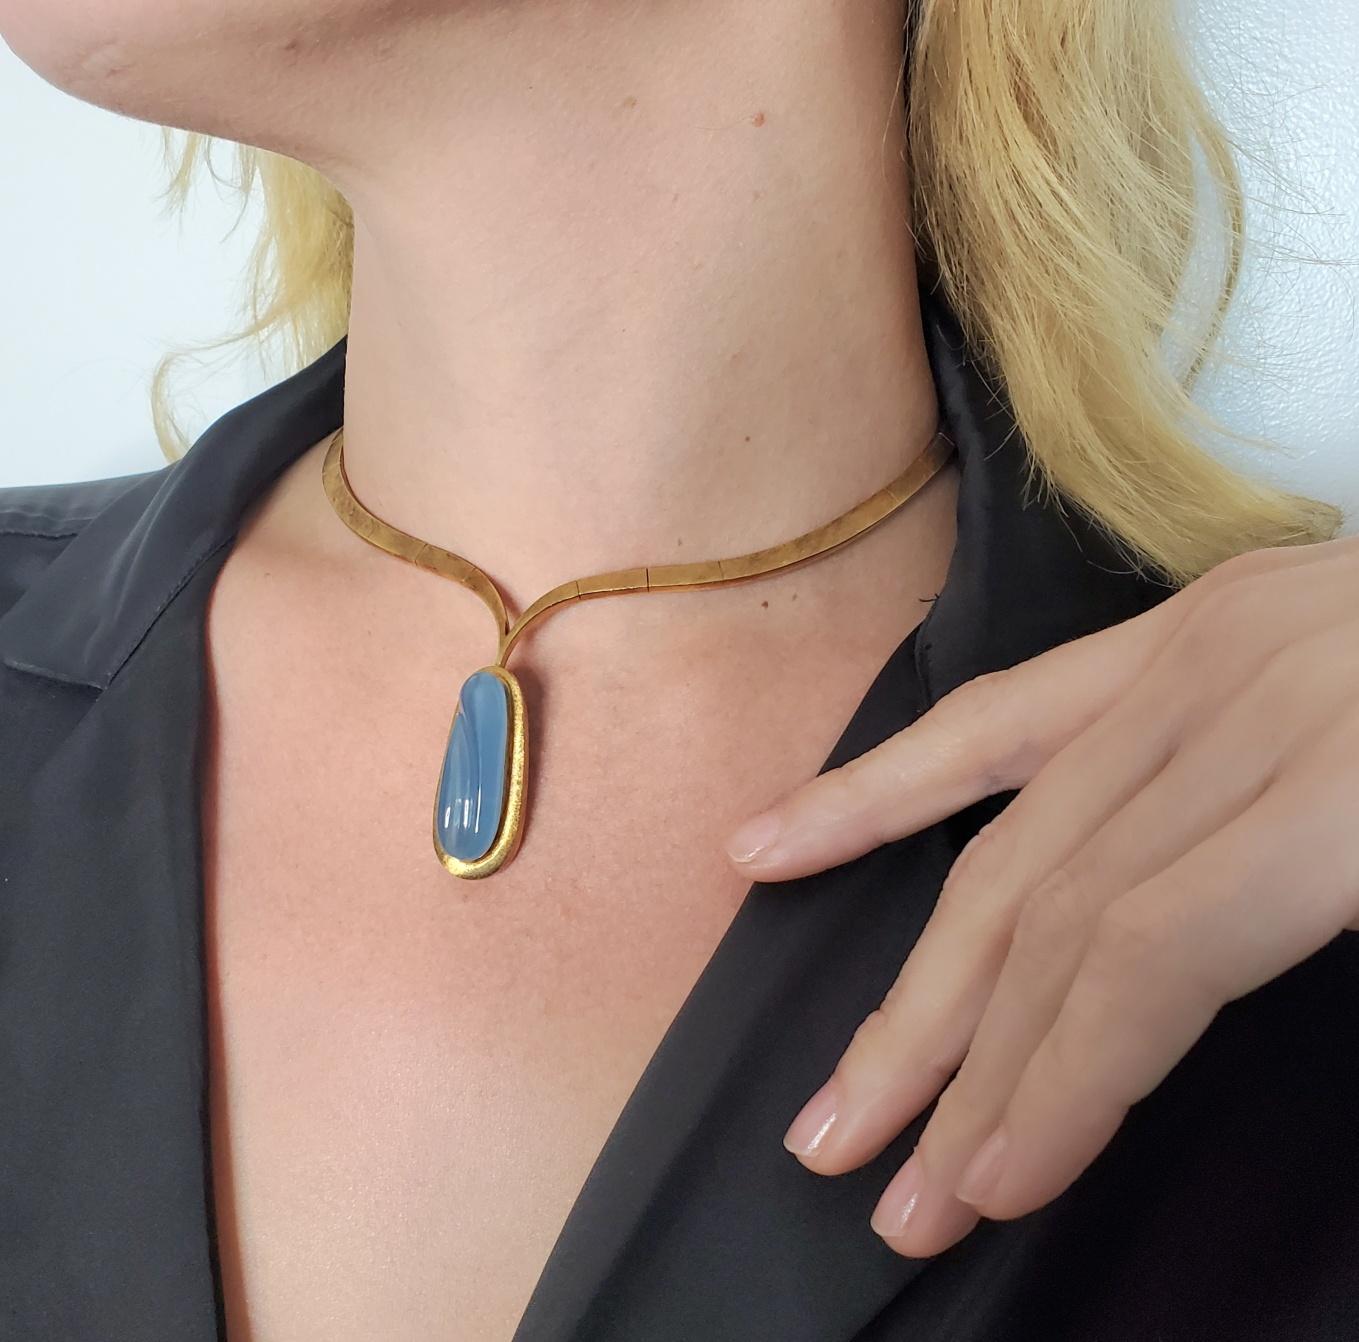 Necklace designed by Haroldo Burle Marx (1911-1991).

A sculptural piece of modernism art, created in Brazil by the artist, designer and jeweler Haroldo Burle Marx, back in the late 1960's. This rare forma livre flexible necklace has been crafted as